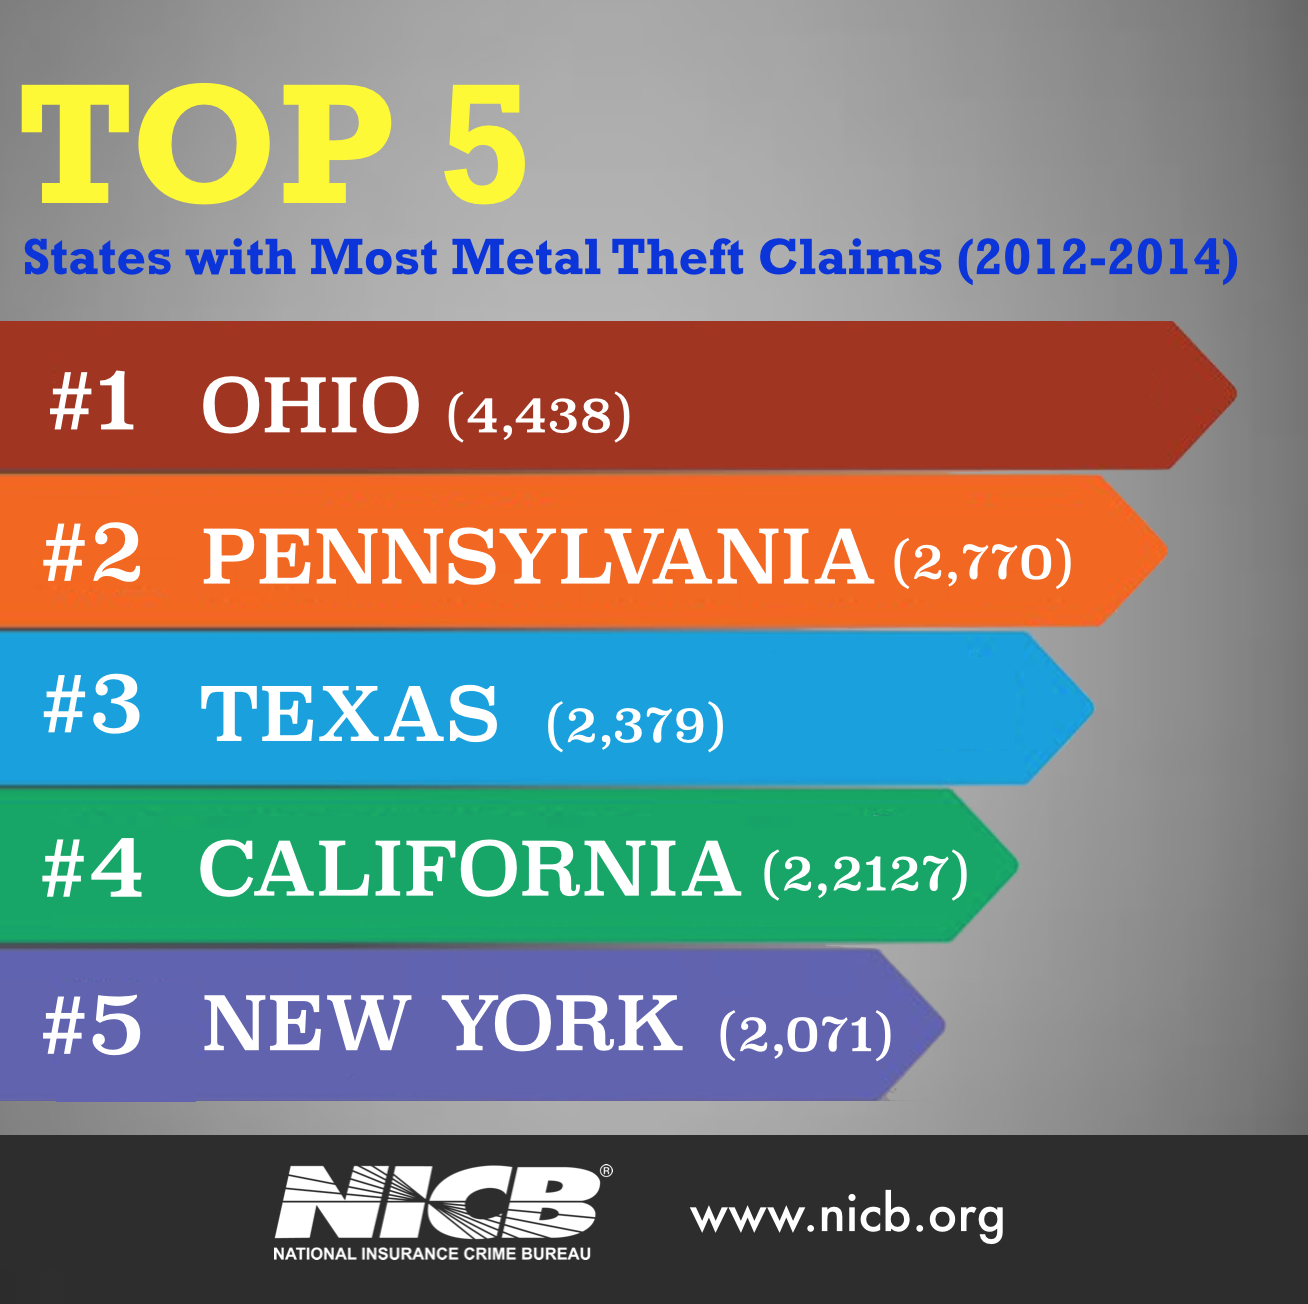 Top 5 States with Most Metal Thefts Claims